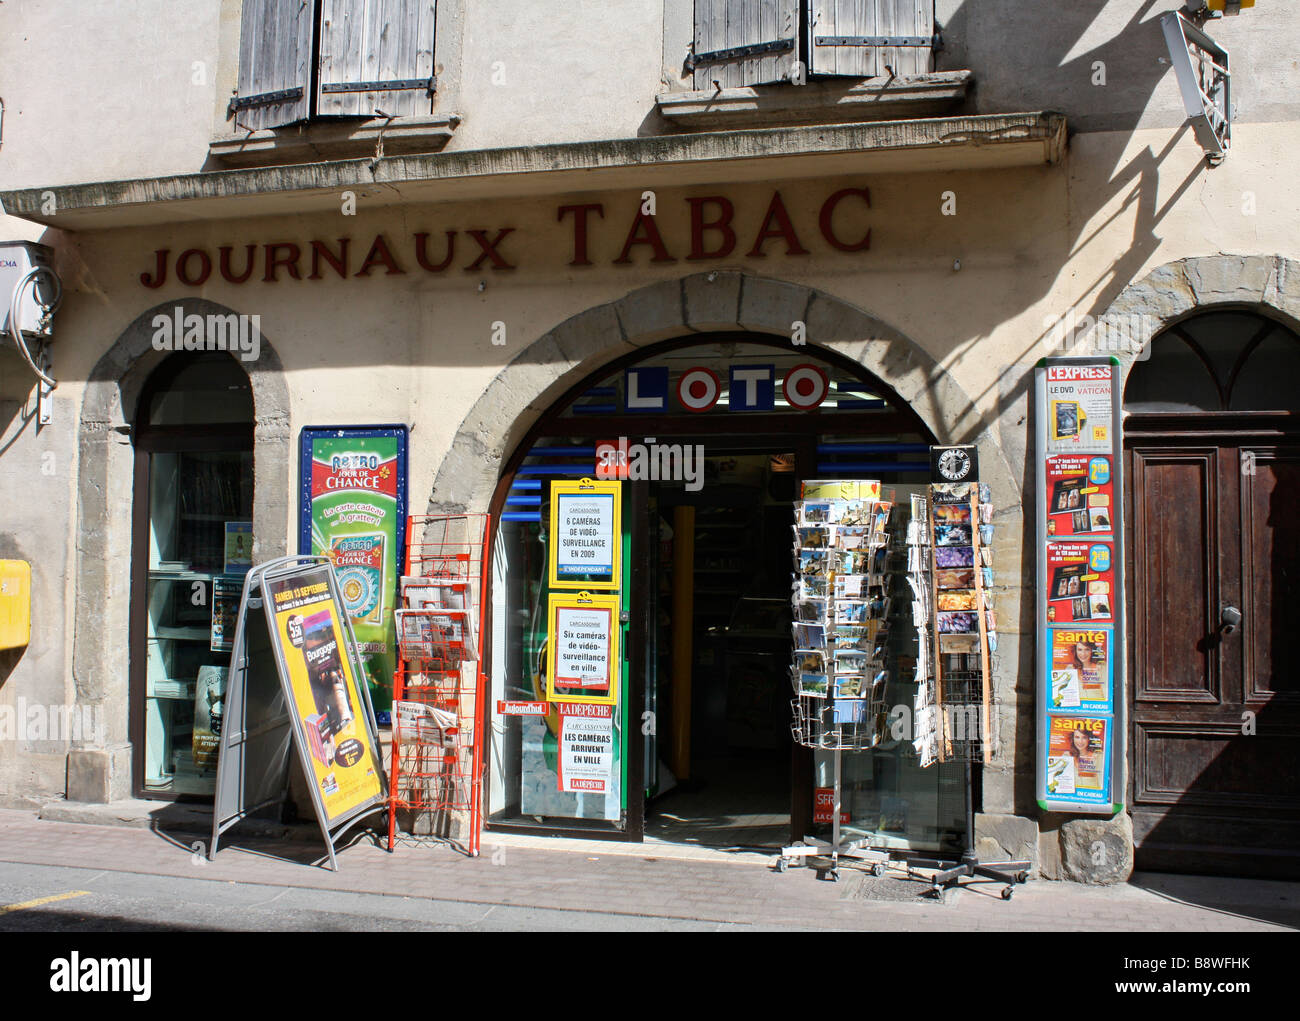 Tabac Shop French High Resolution Stock Photography and Images - Alamy